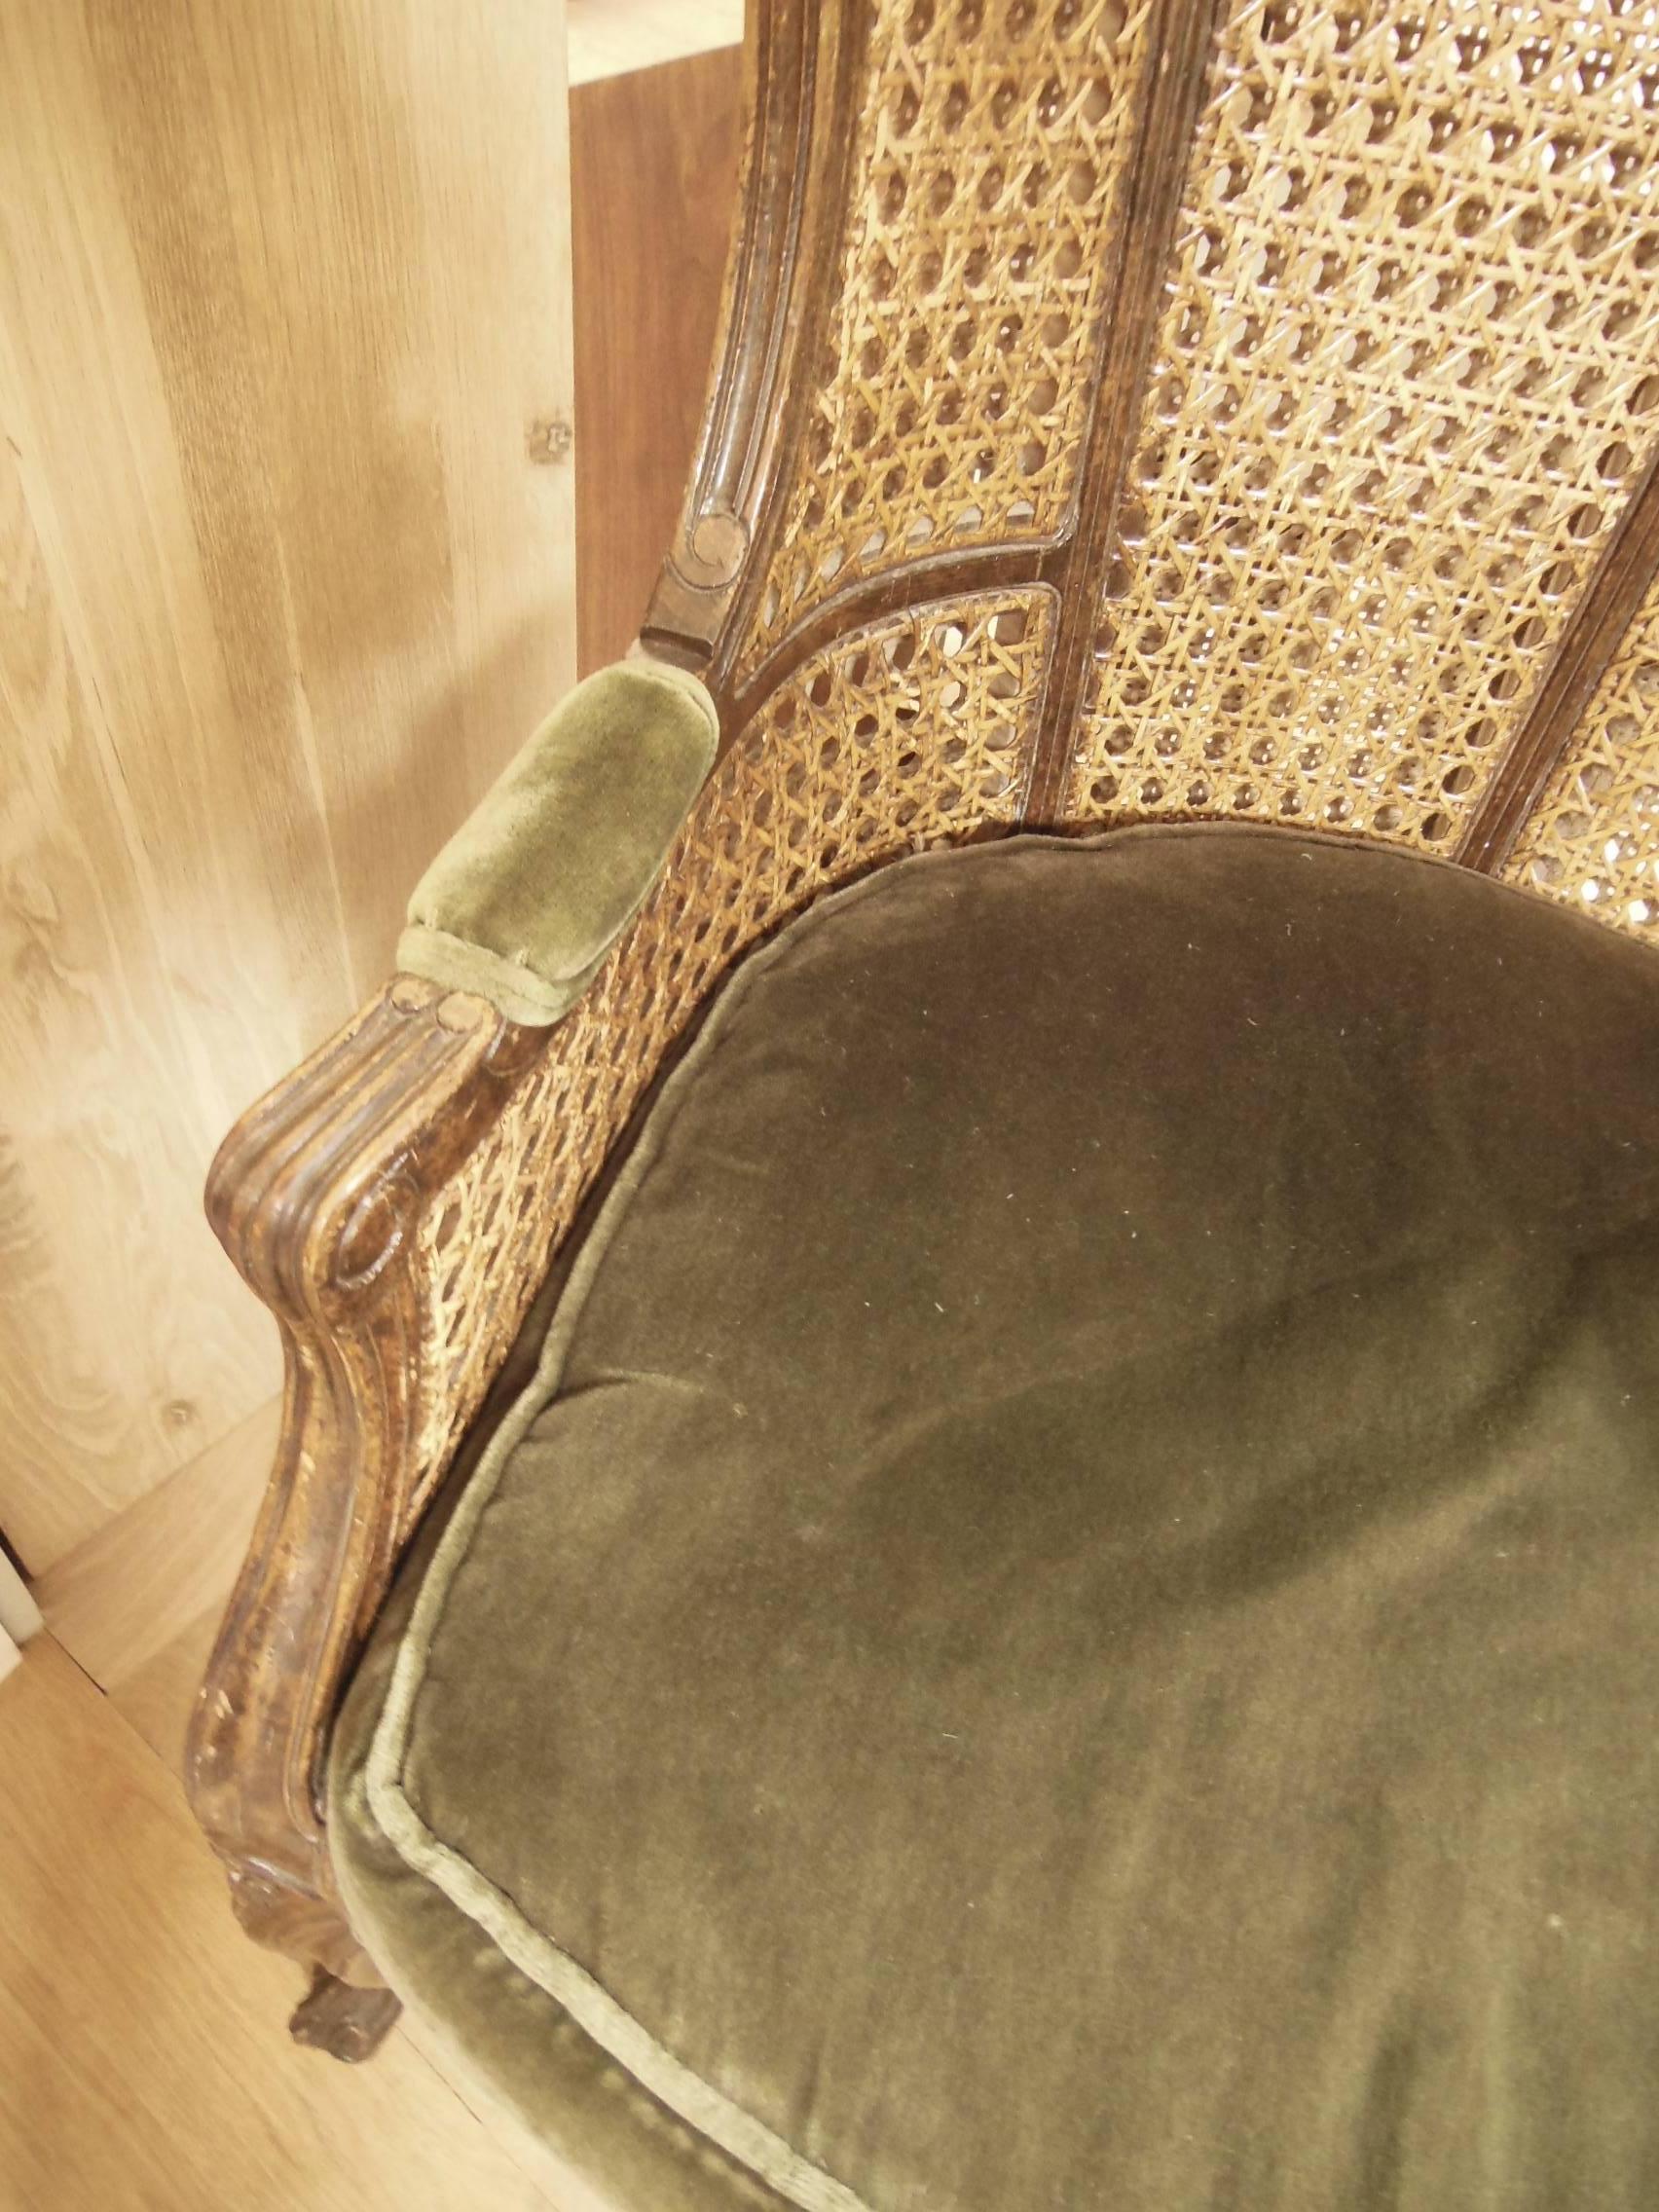 Vintage French Caned Hooded Armchair In Excellent Condition For Sale In Sag Harbor, NY